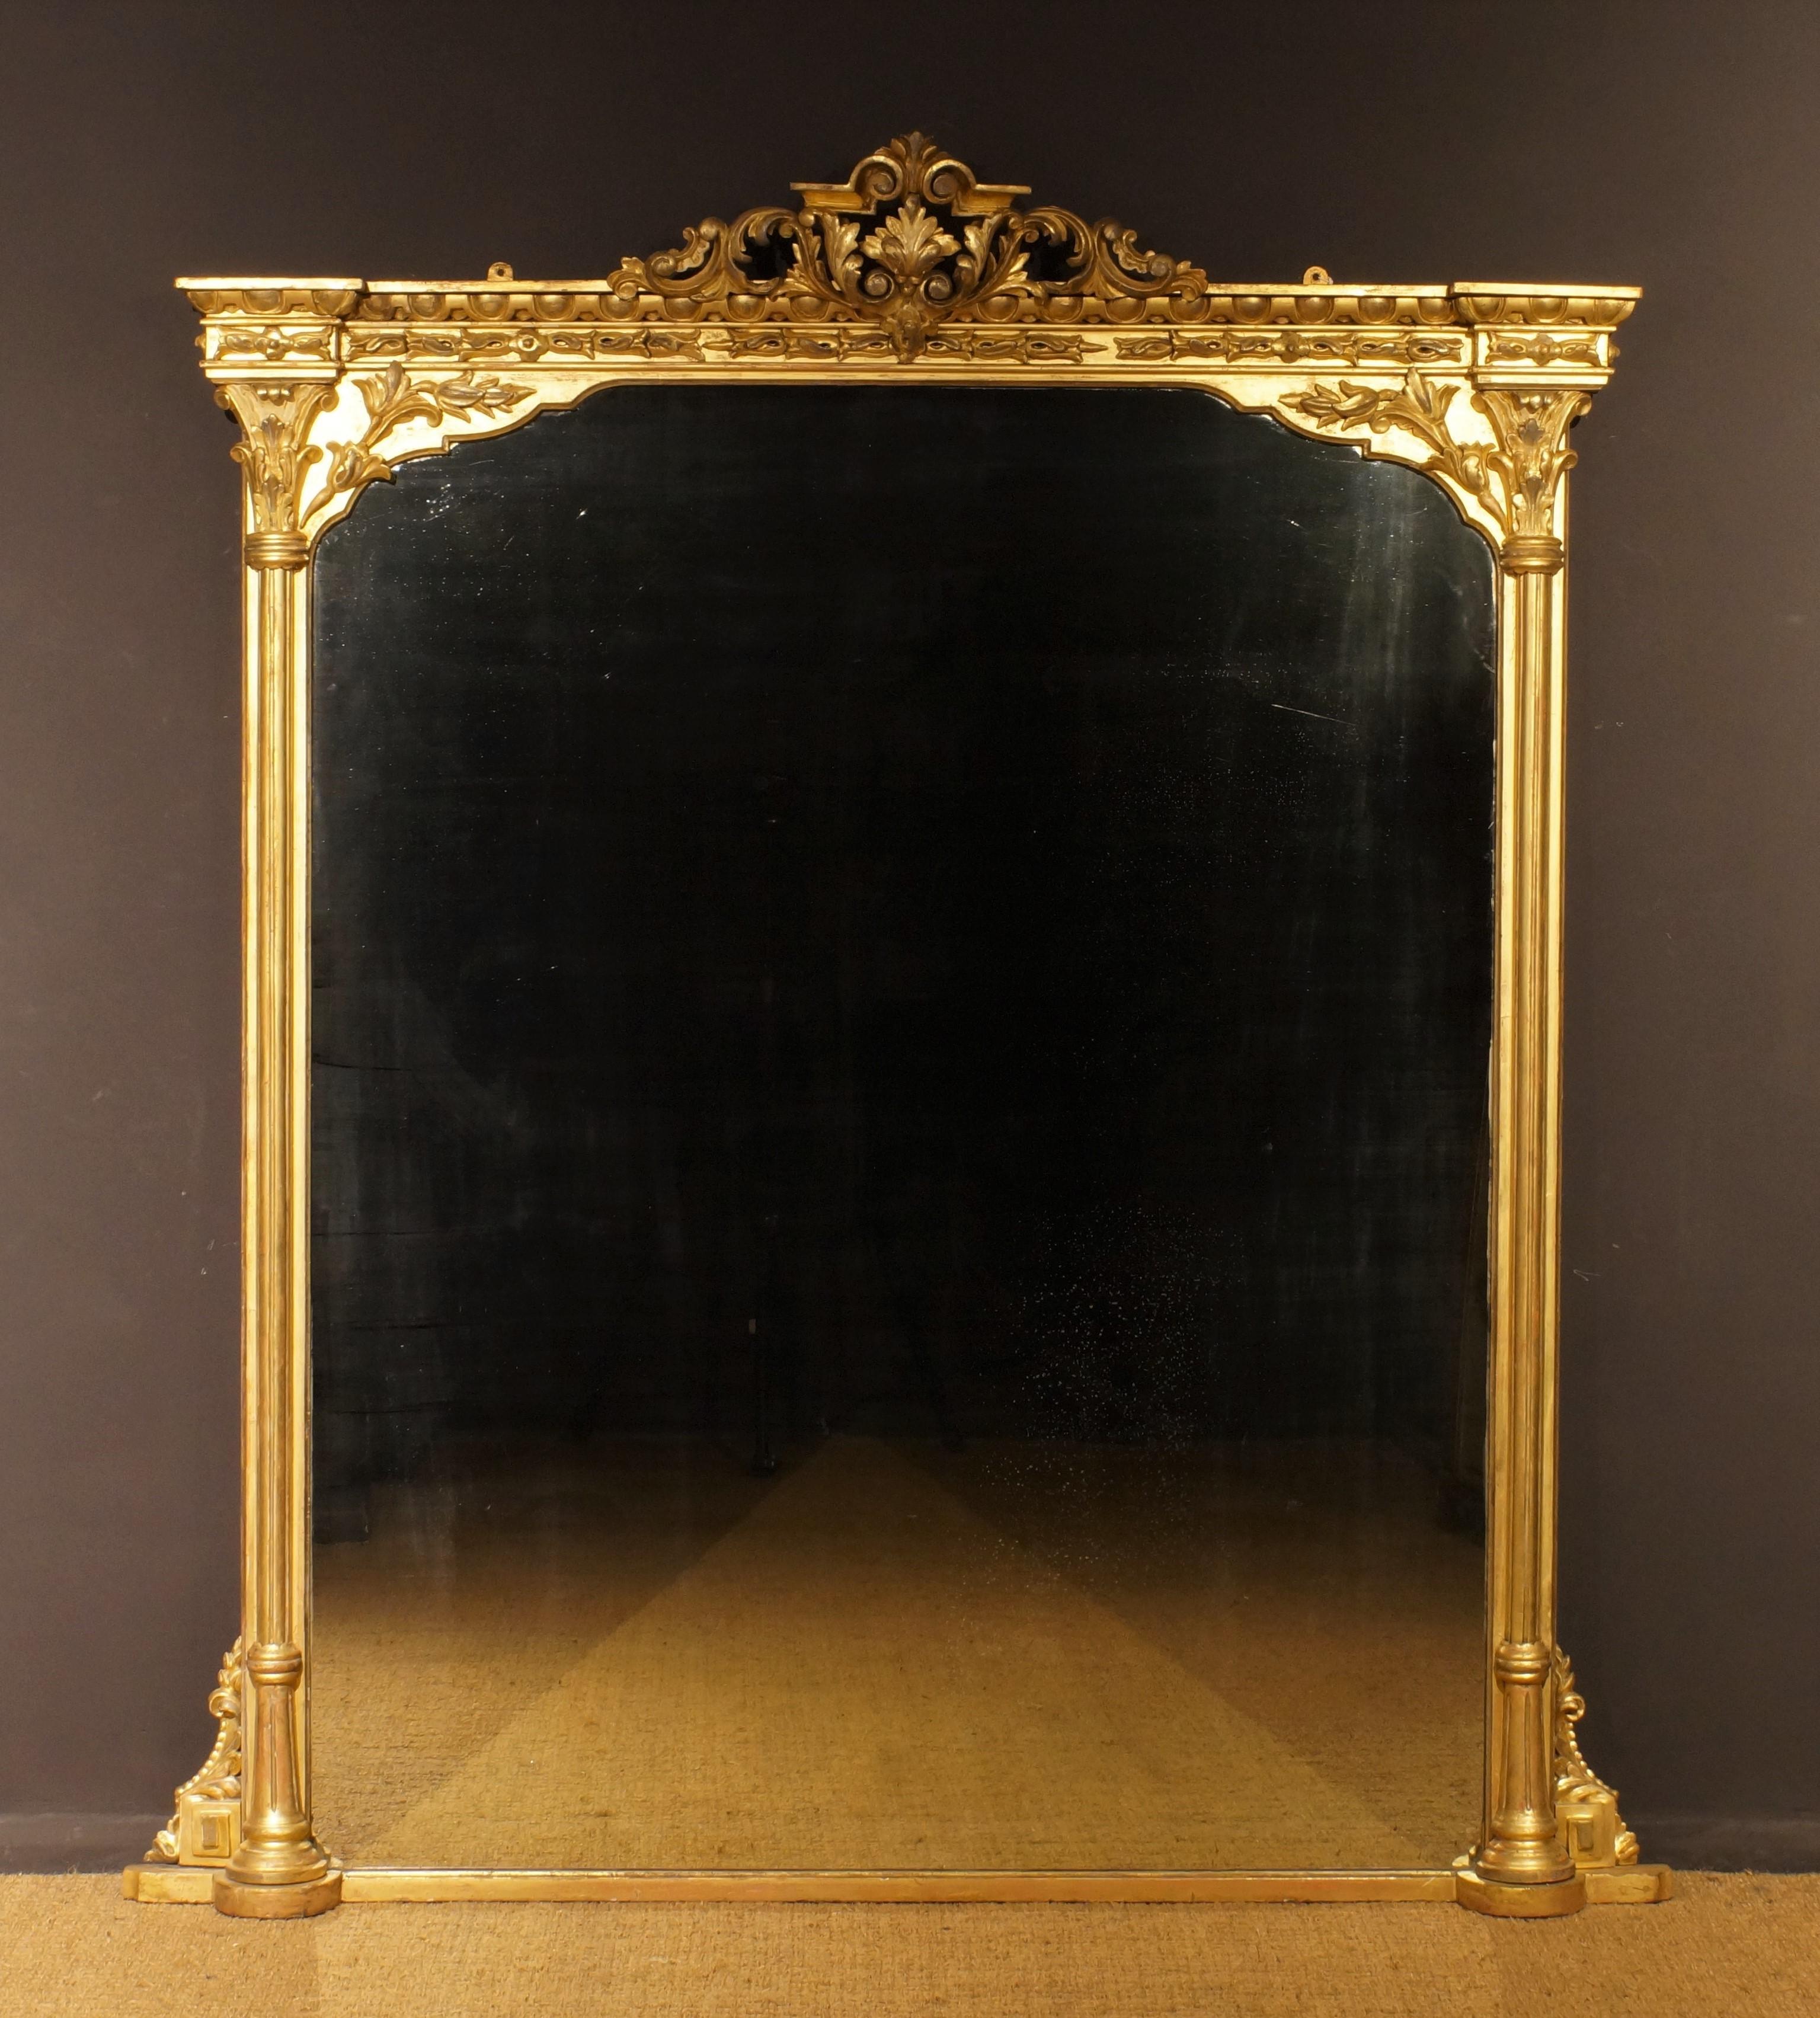 The top with egg and dart carving to the stepped cornice and tulip and rose carved decoration to the frieze, the side fluted pillars topped by acanthus leaf capitals; the bottom with foliate scrolls and stepped base.
Of rare grand scale this mirror